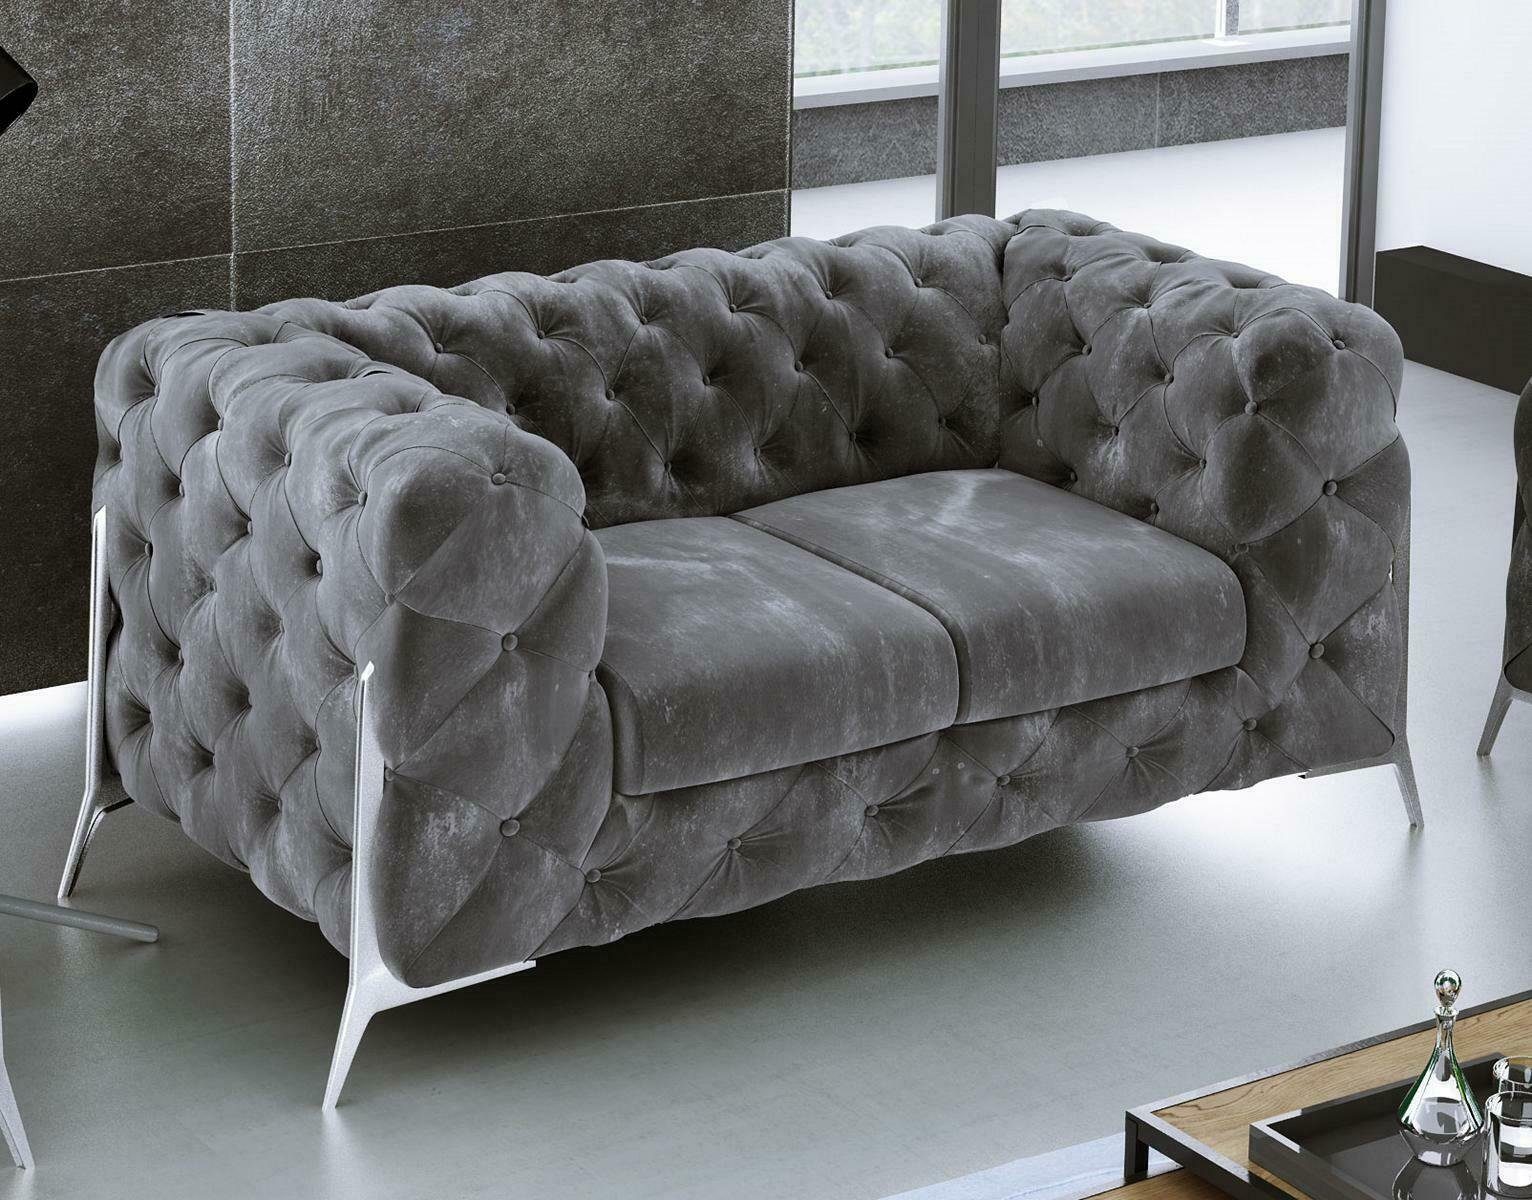 JVmoebel Sofa Chesterfield Couch 2 Sitzer Polster Sitz Textil Stoff Leder,  Made in Europe